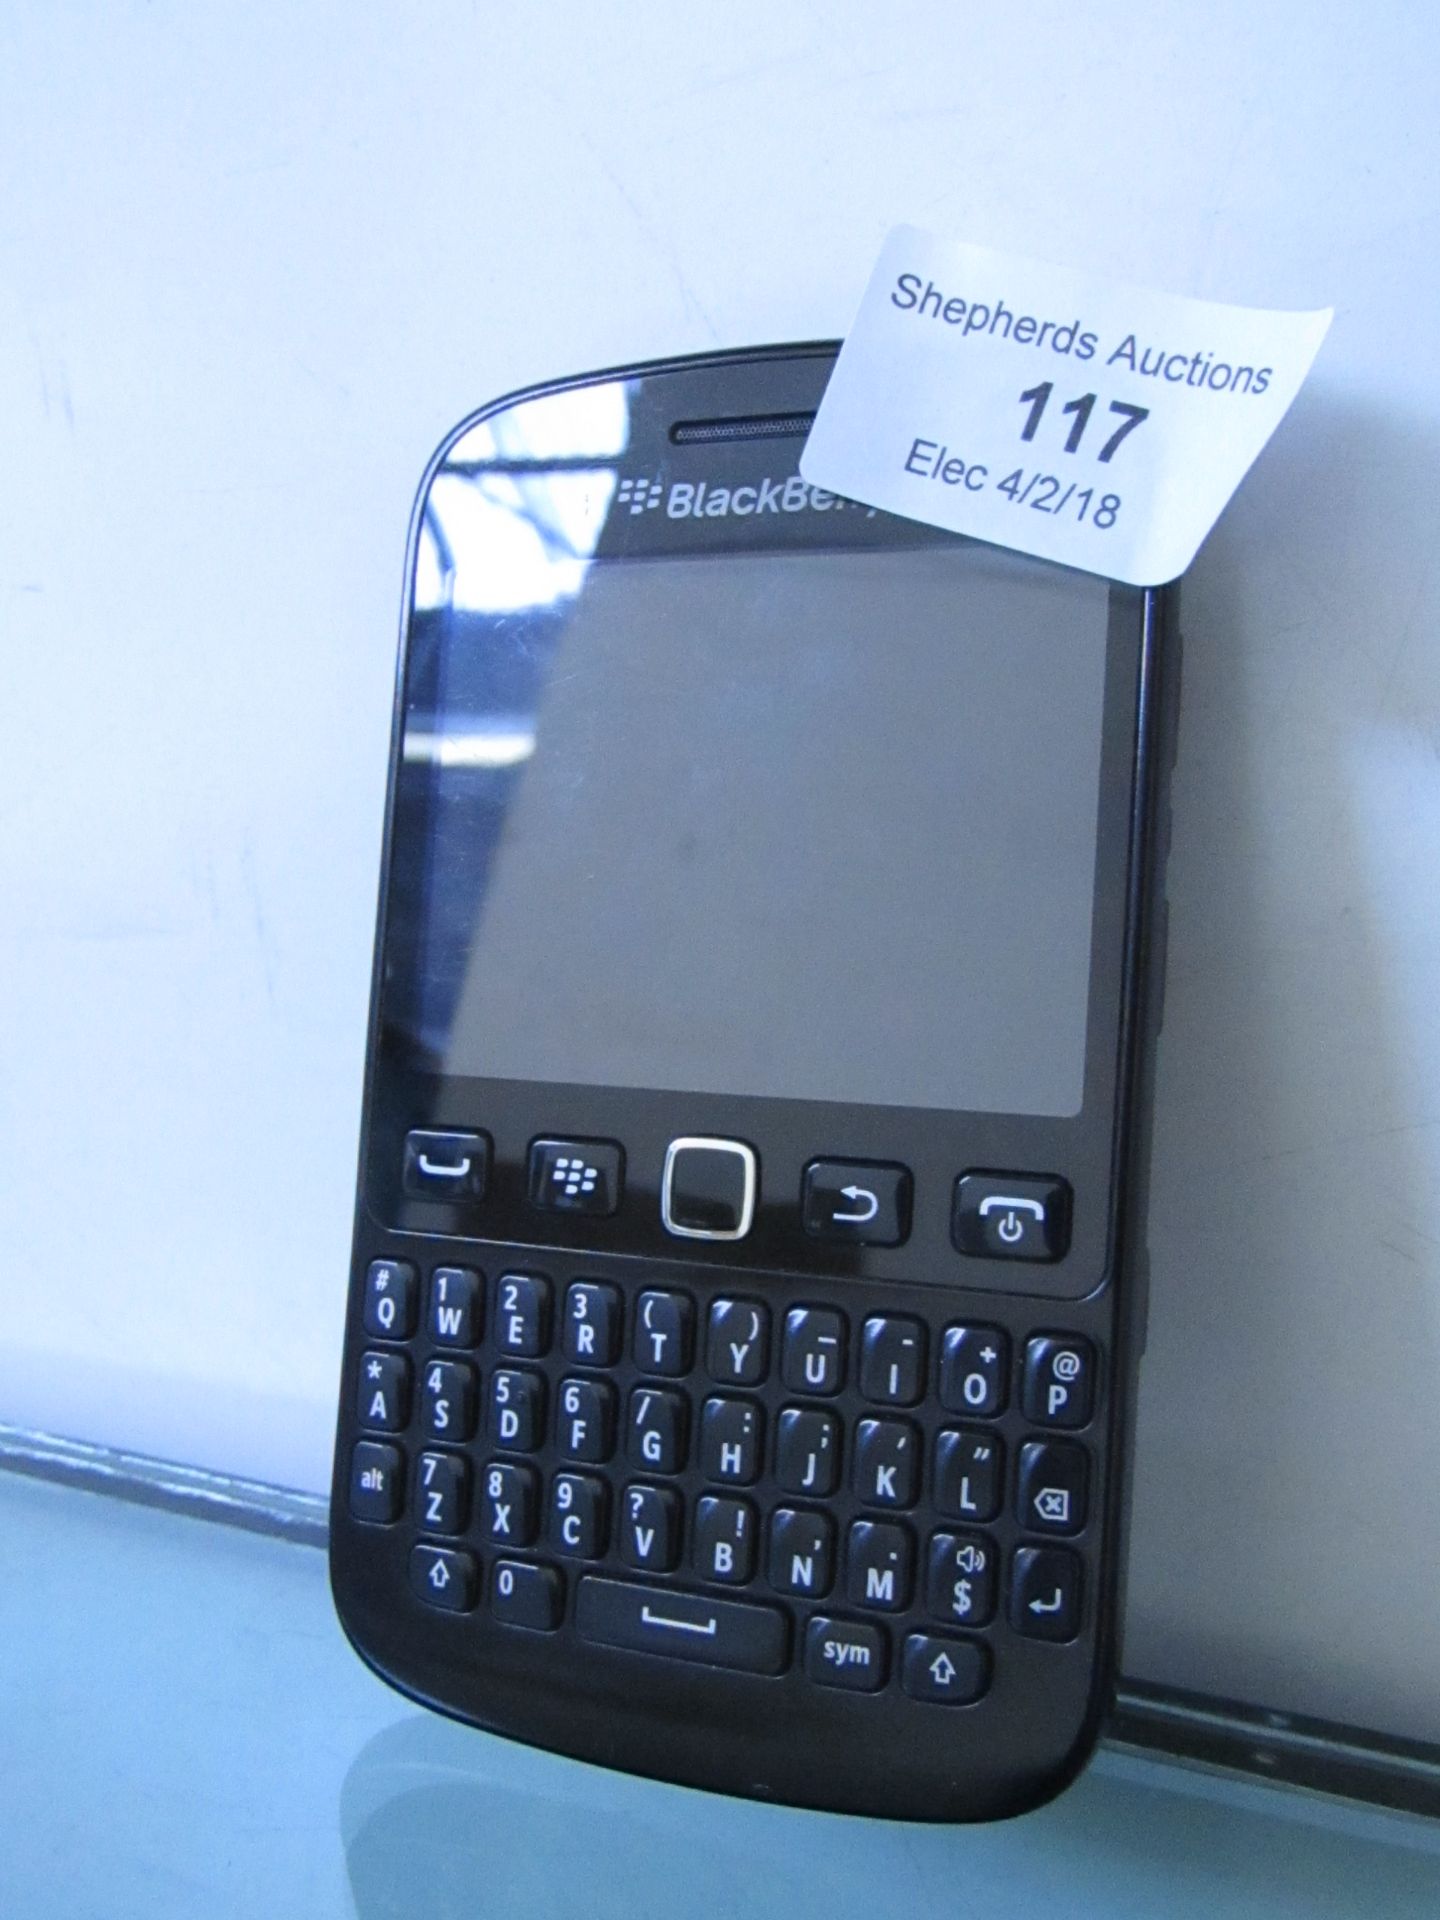 Blackberry 9720 Phone with charger, Powers on